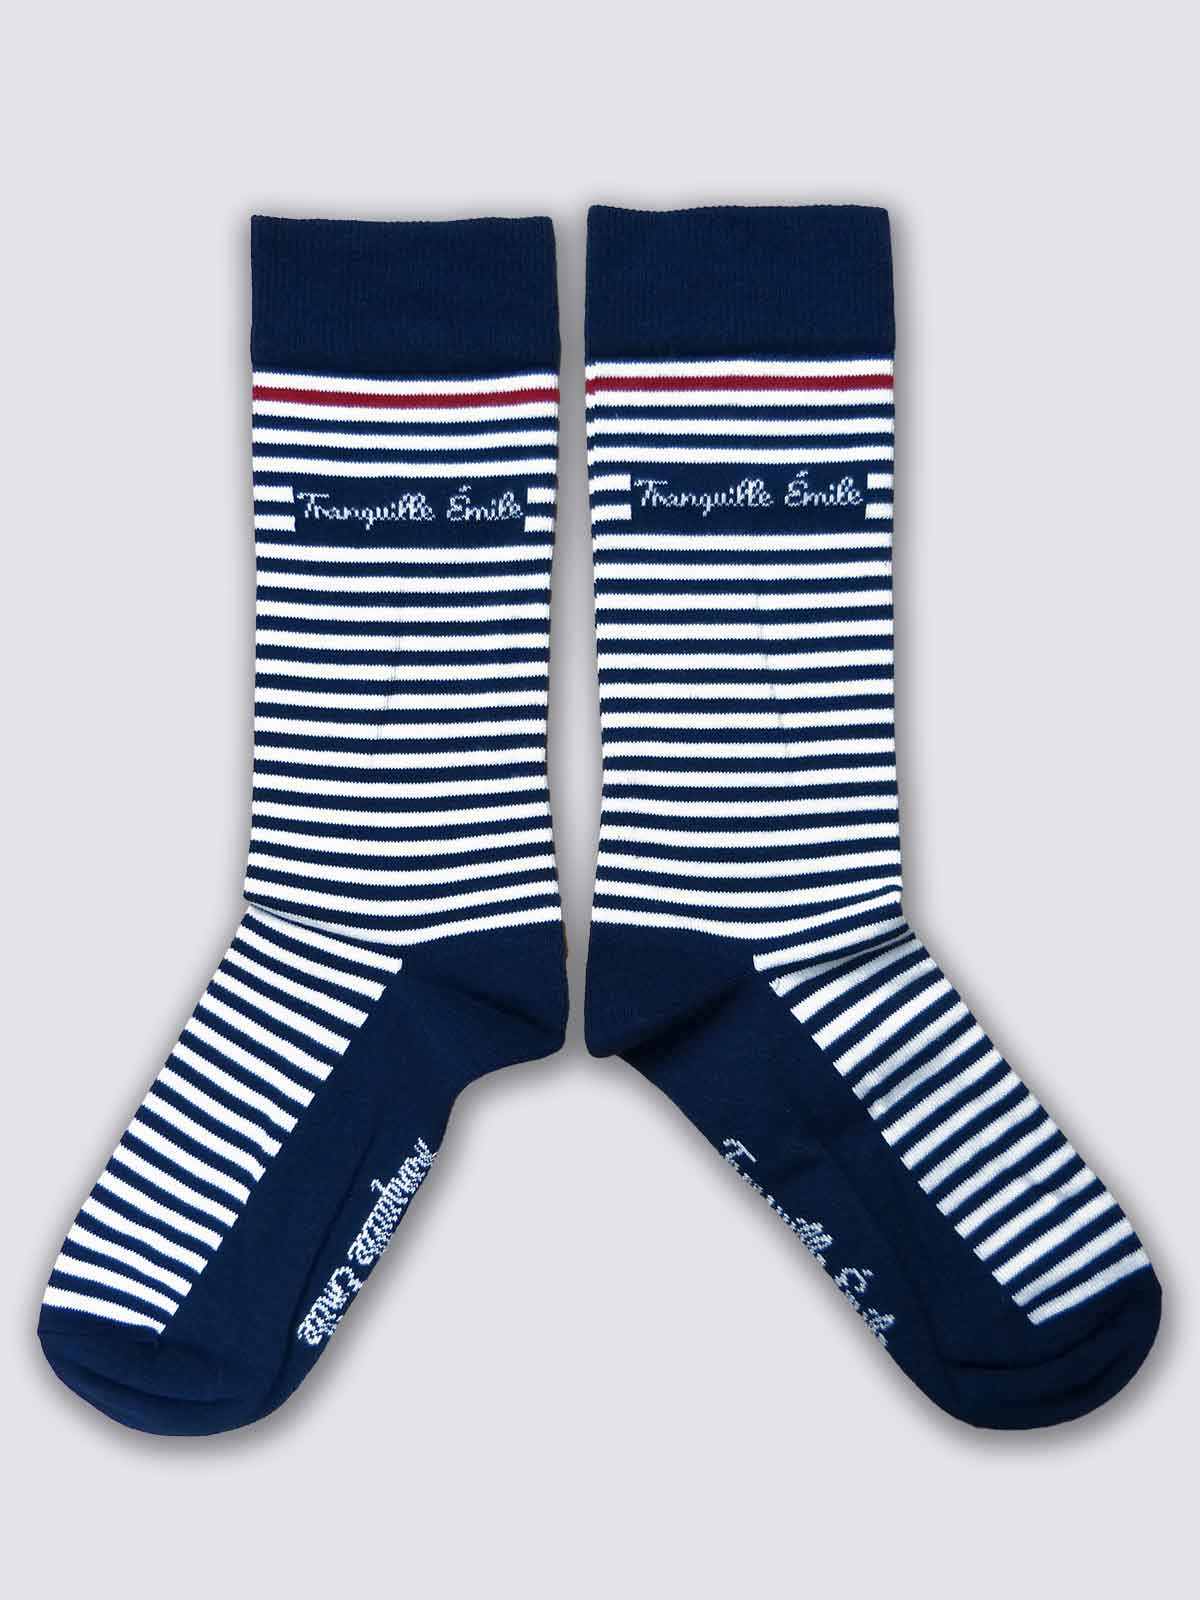 chaussettes-made-in-france-tranquille-emile-les-rayees-4